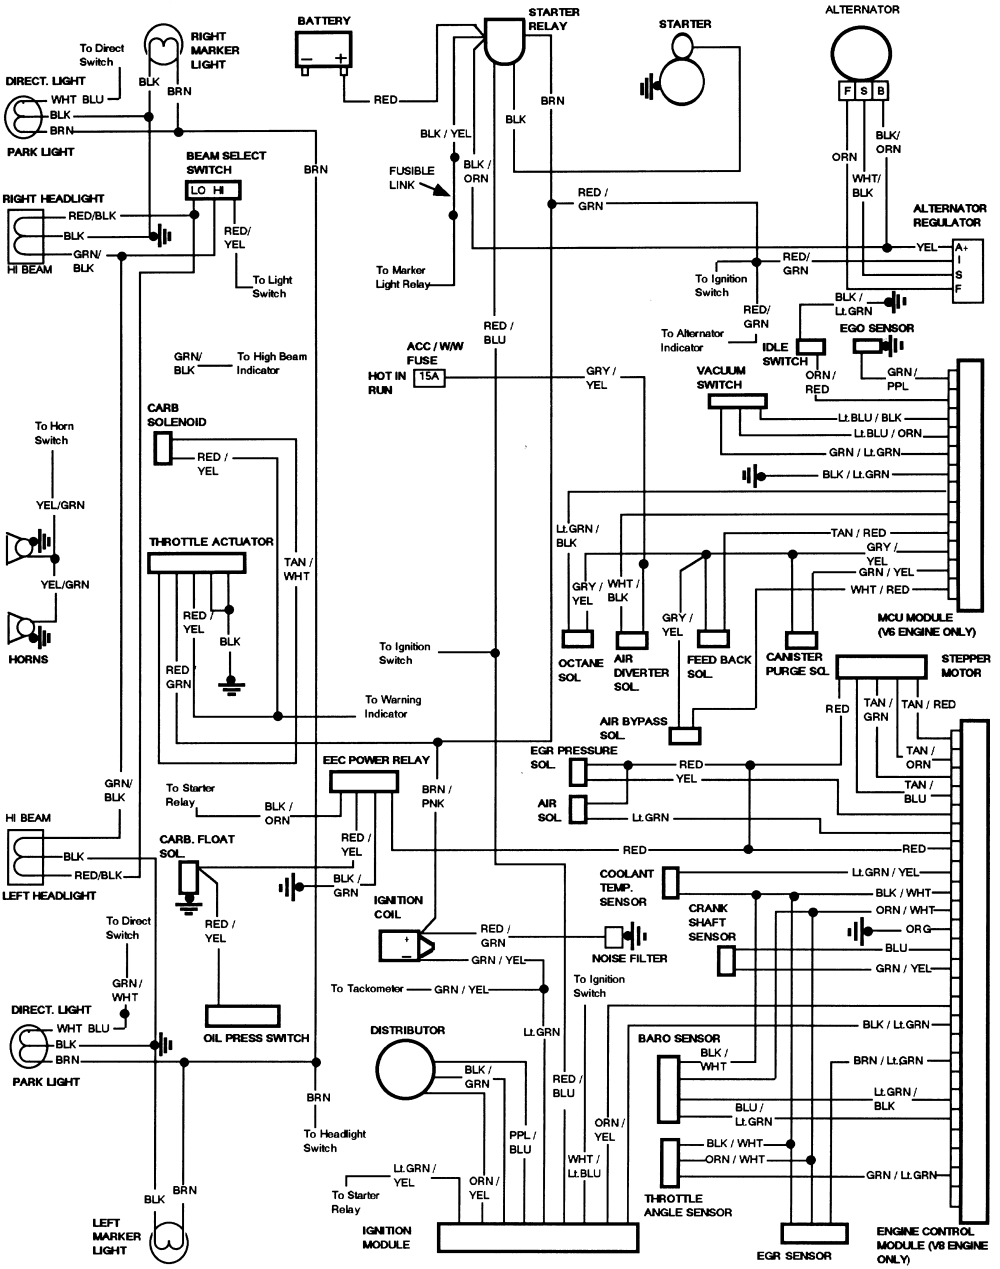 Ford F 150 Wiring Diagram from econtent.autozone.com